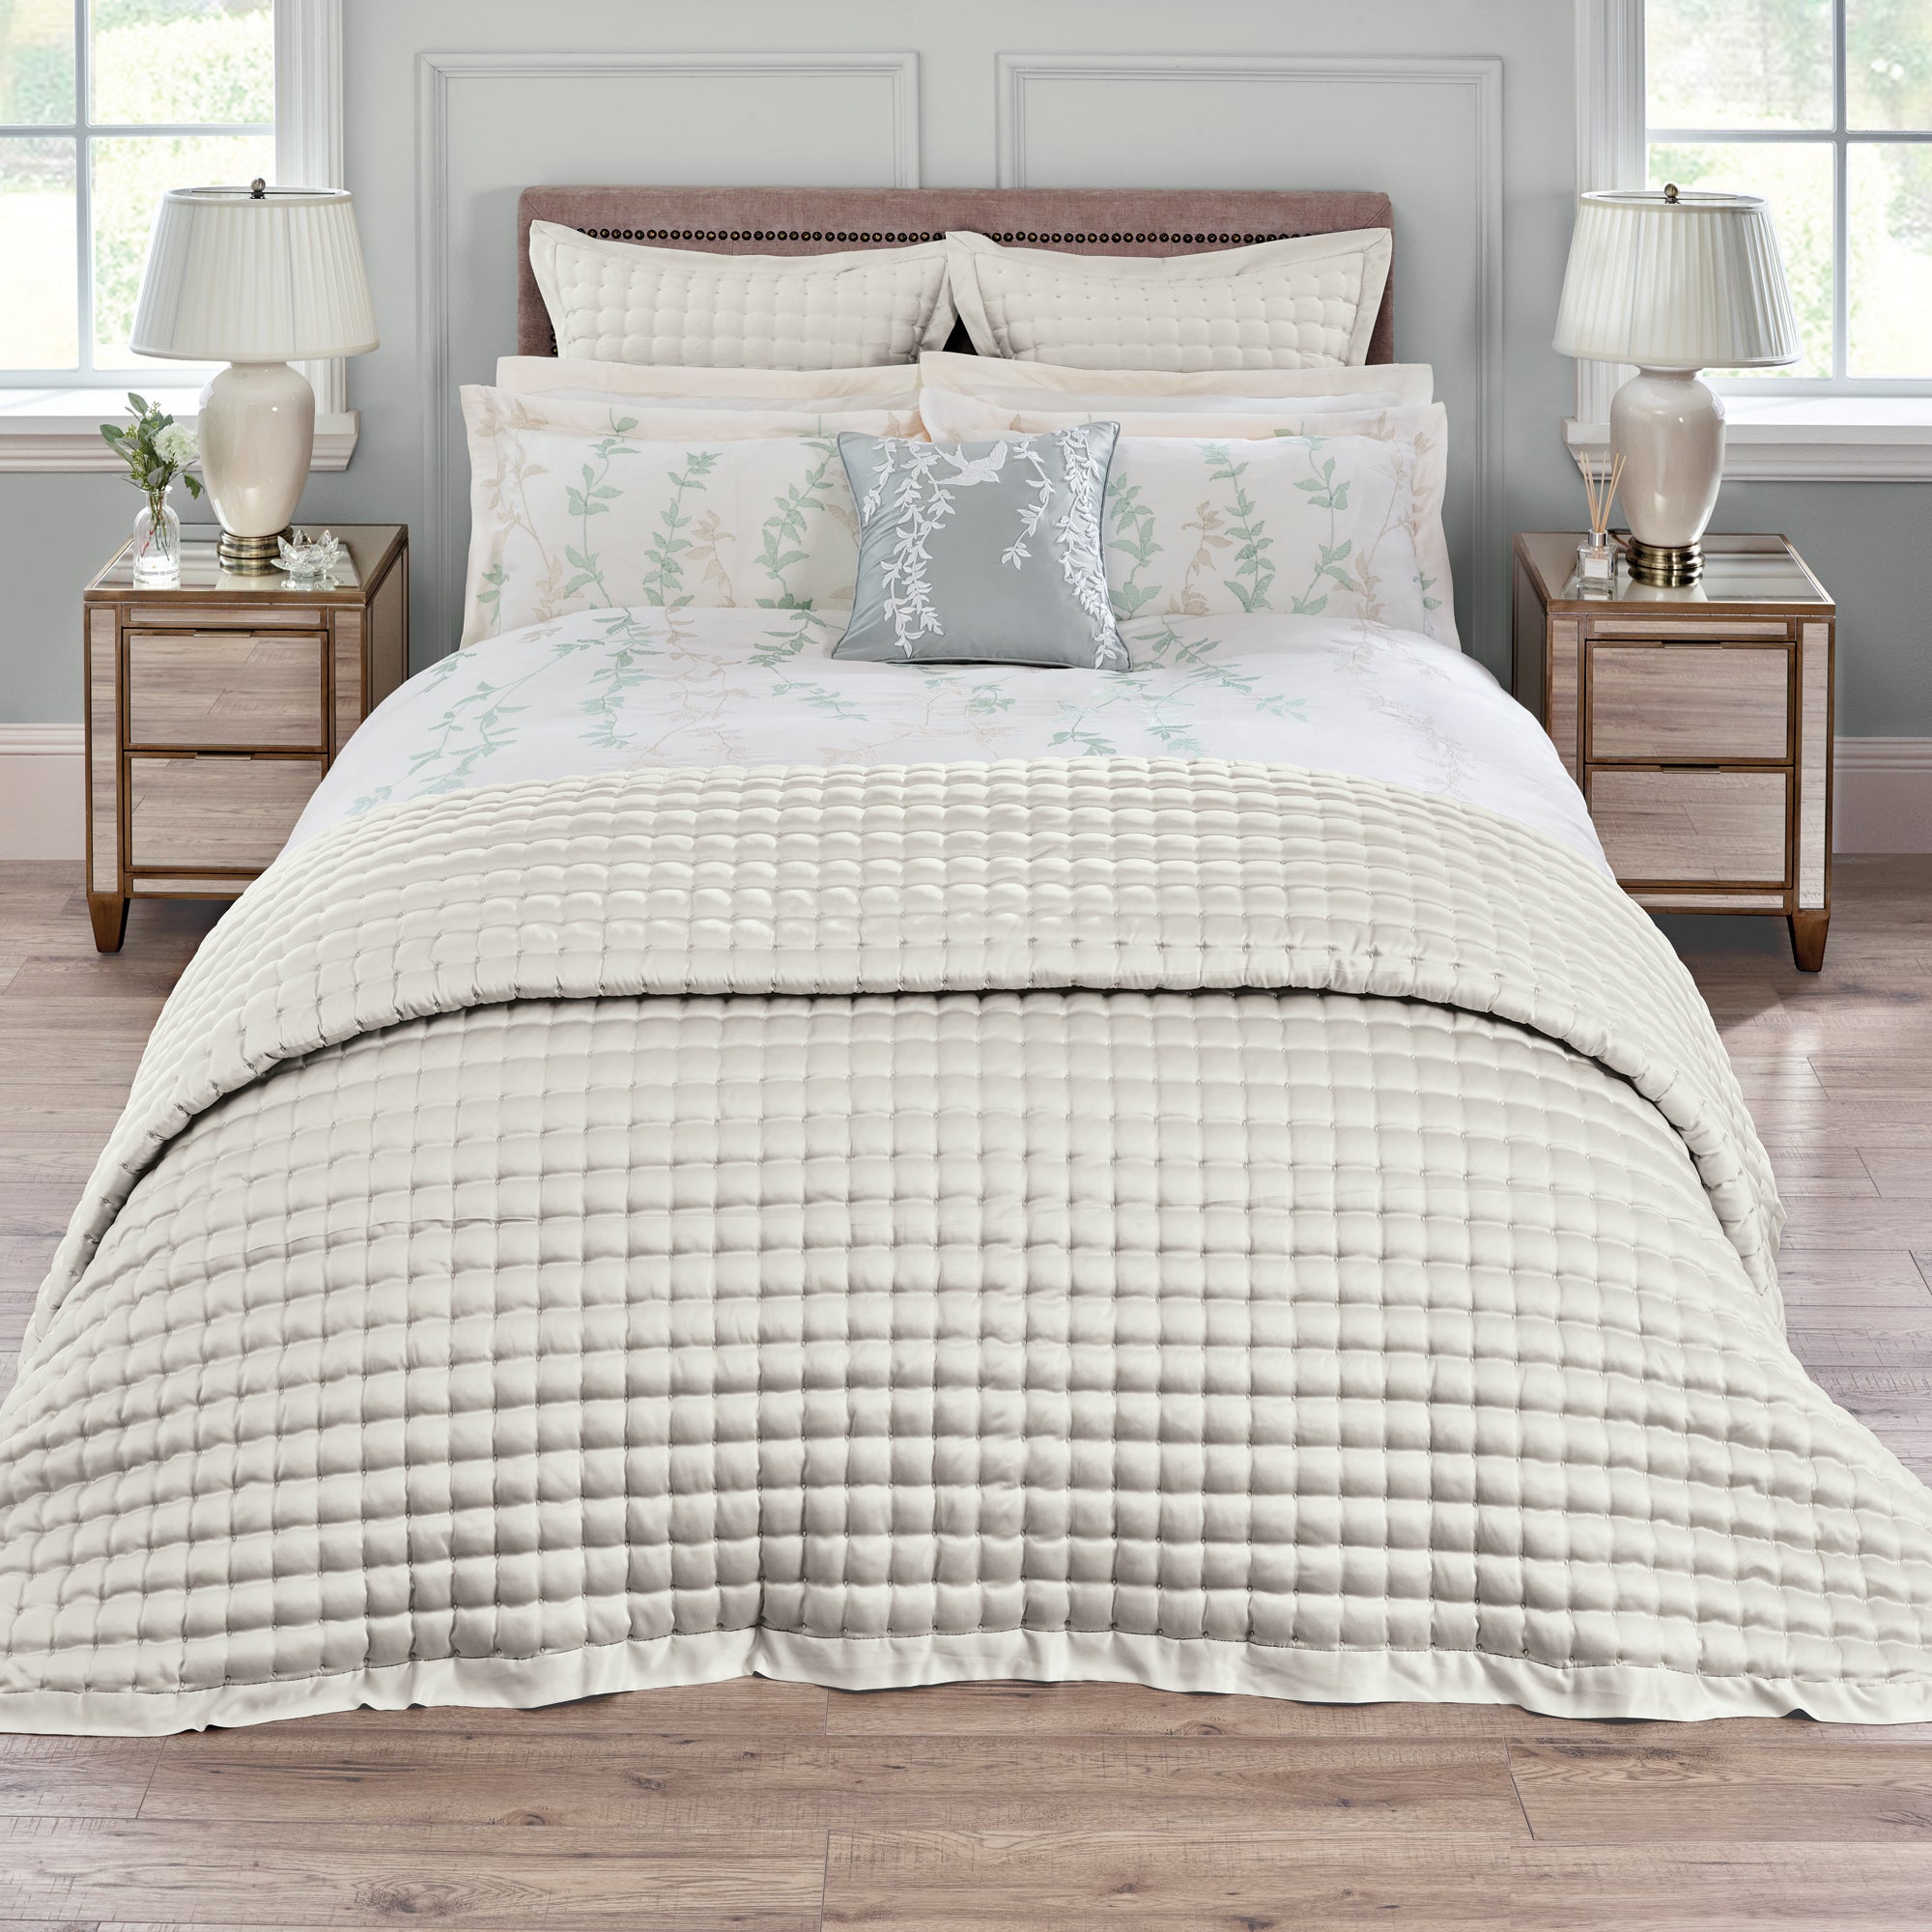 Shop The Dorma Bedding Collection | Dunelm | Page 2